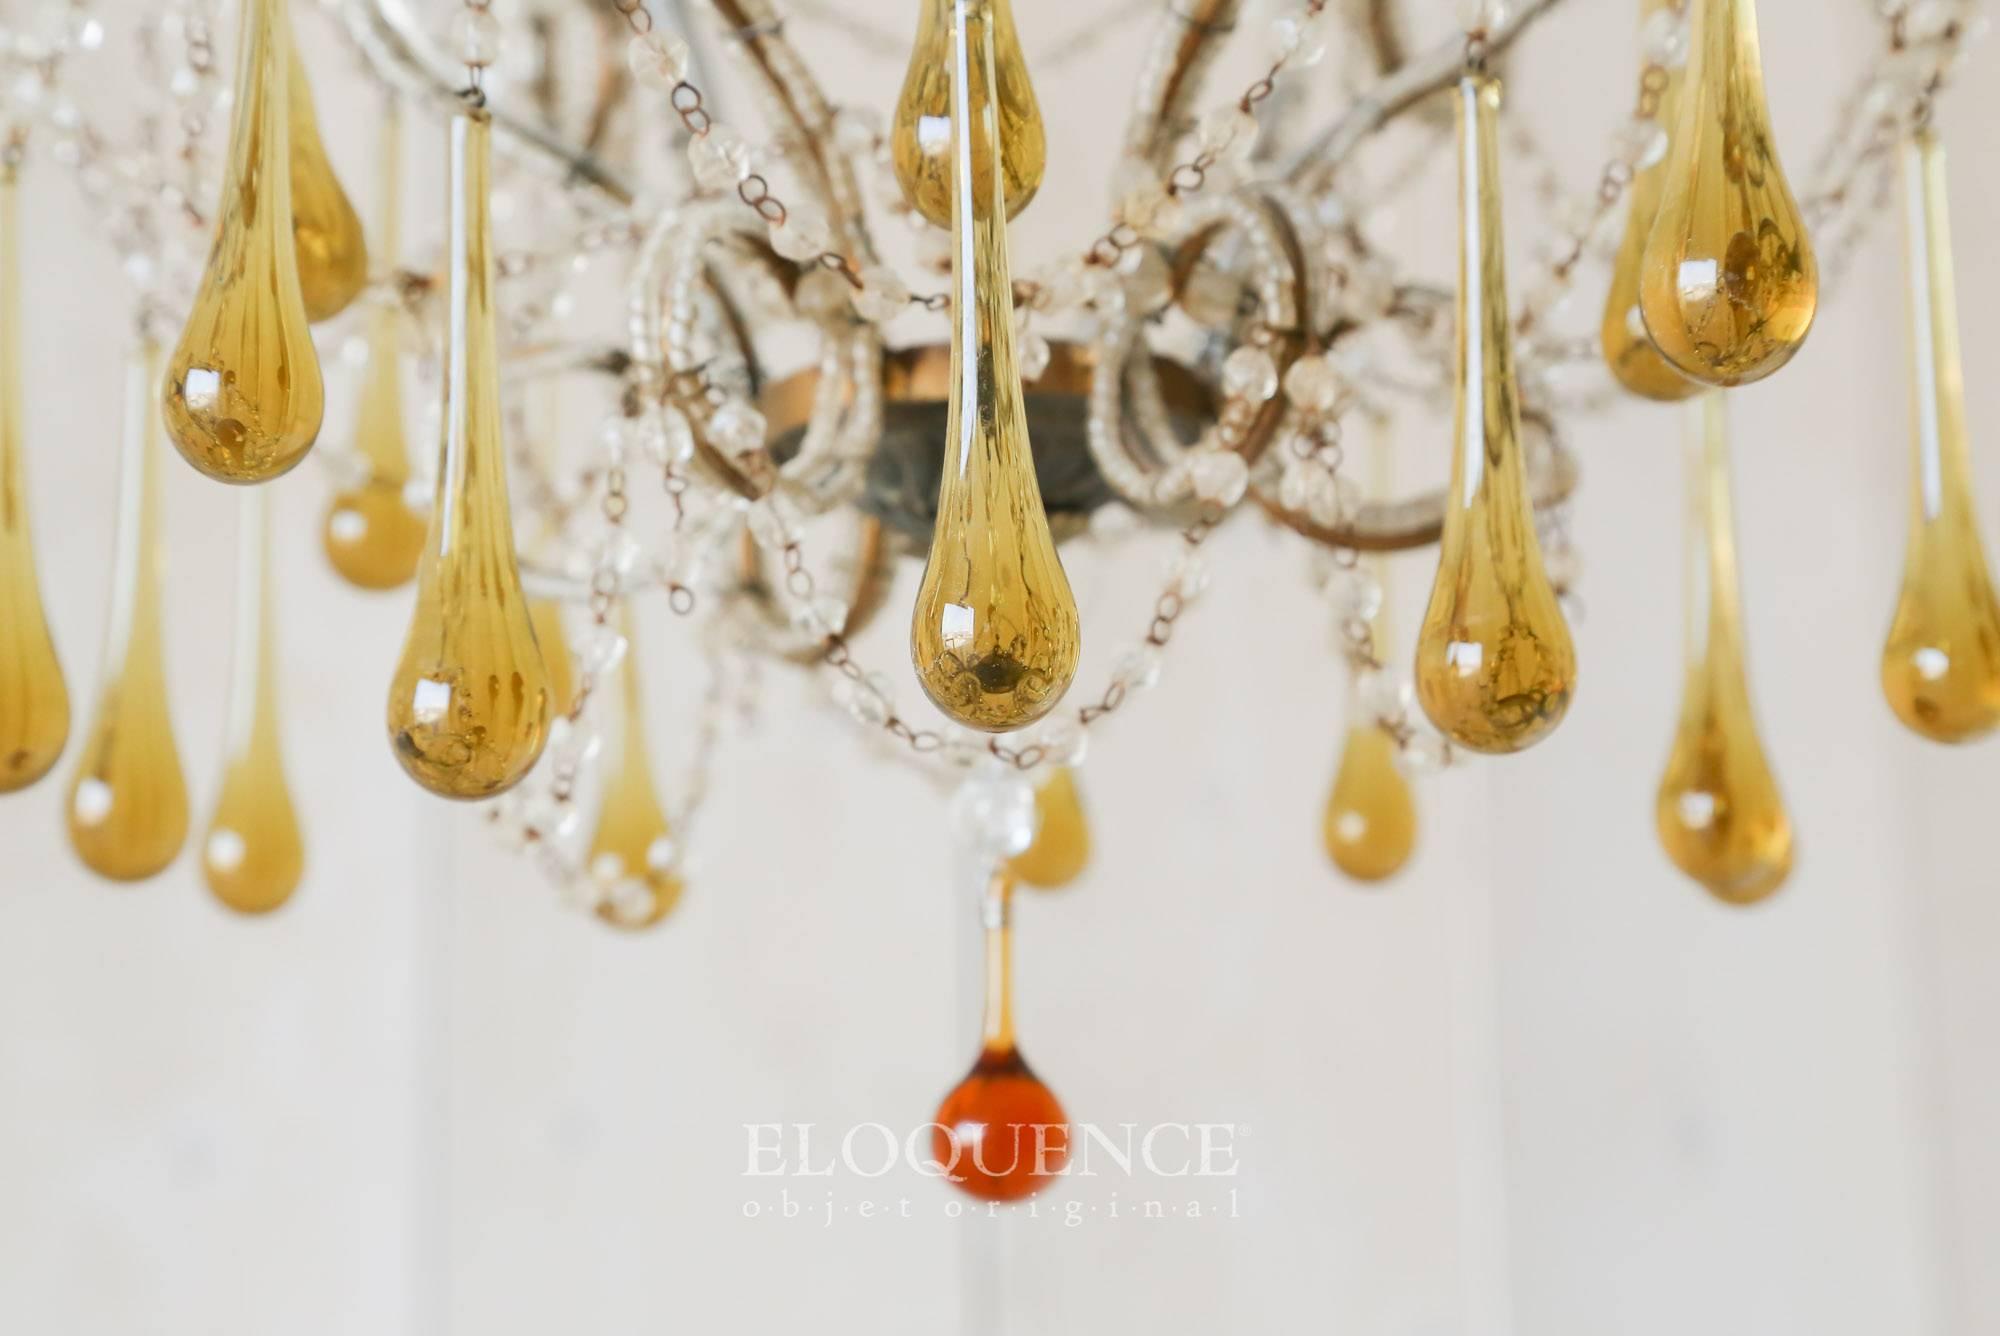 Stunning antique Italian chandelier in a deep brass. Each of the scrolling six arms are covered in glass beading and topped with glass candle cups. Strings of glass beads and pendants of honey colored pendants simply drip off the cage design. This